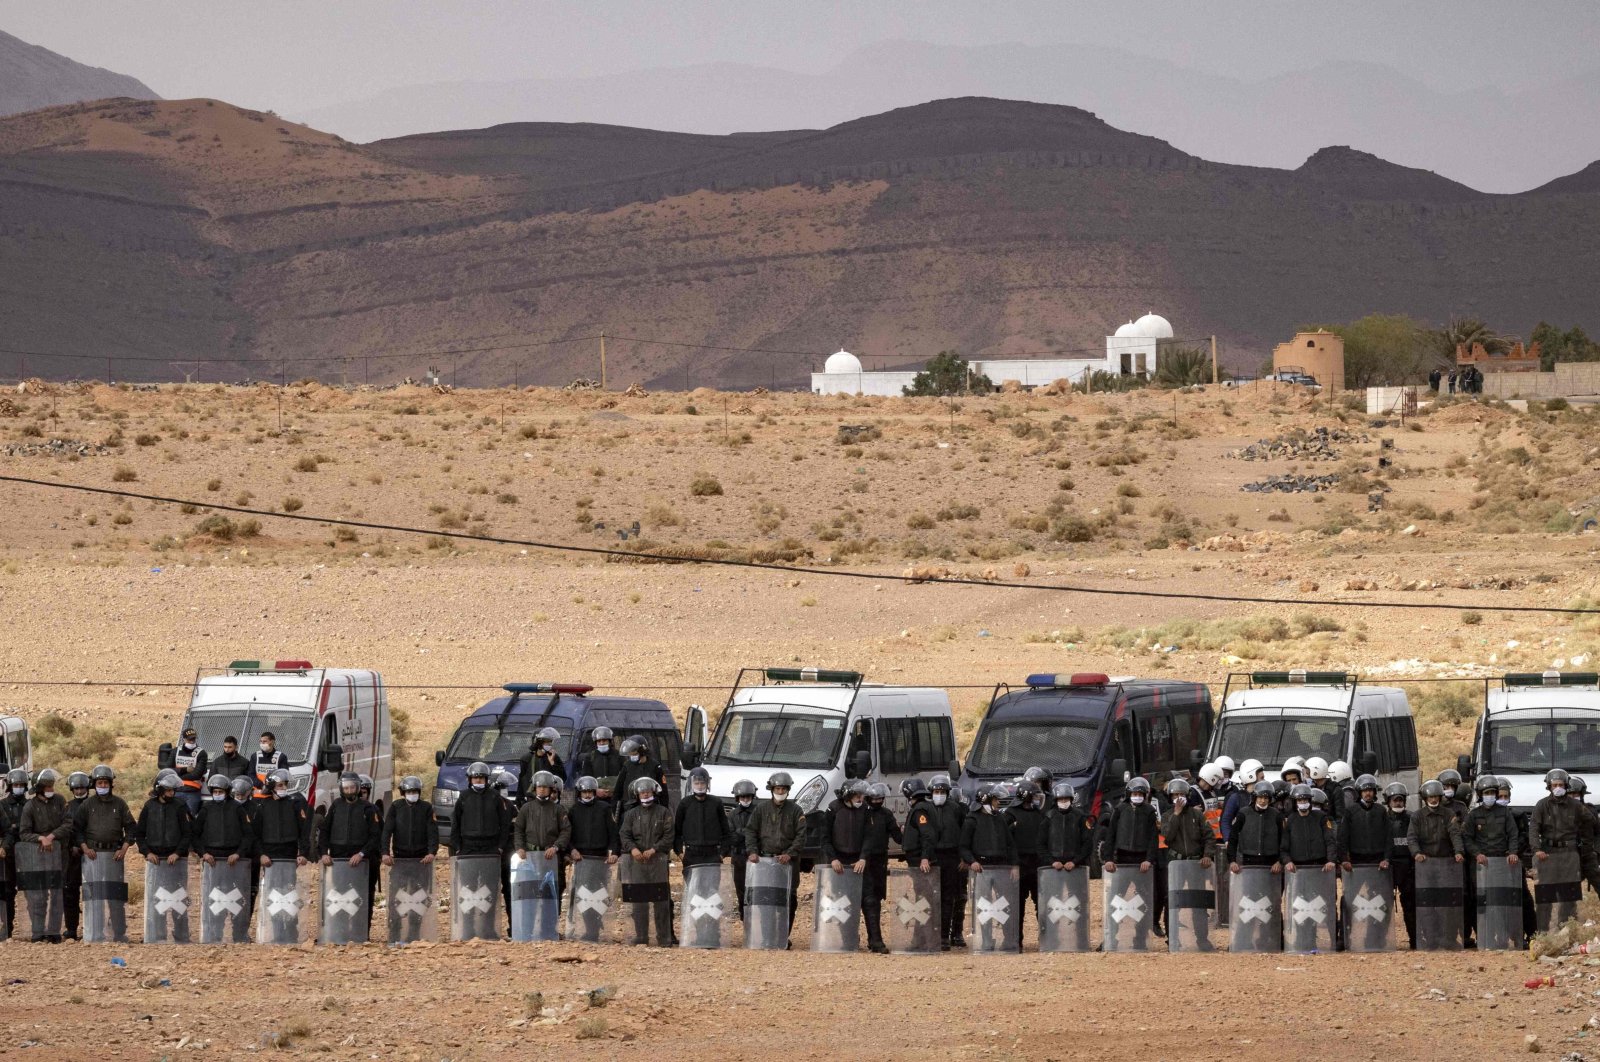 Moroccan security forces stand guard as Moroccan farmers protest in the city of Figuig after Algerian authorities expelled date growers from the Algerian territory, a border area they are traditionally authorized to farm, March 18, 2021. (AFP Photo)